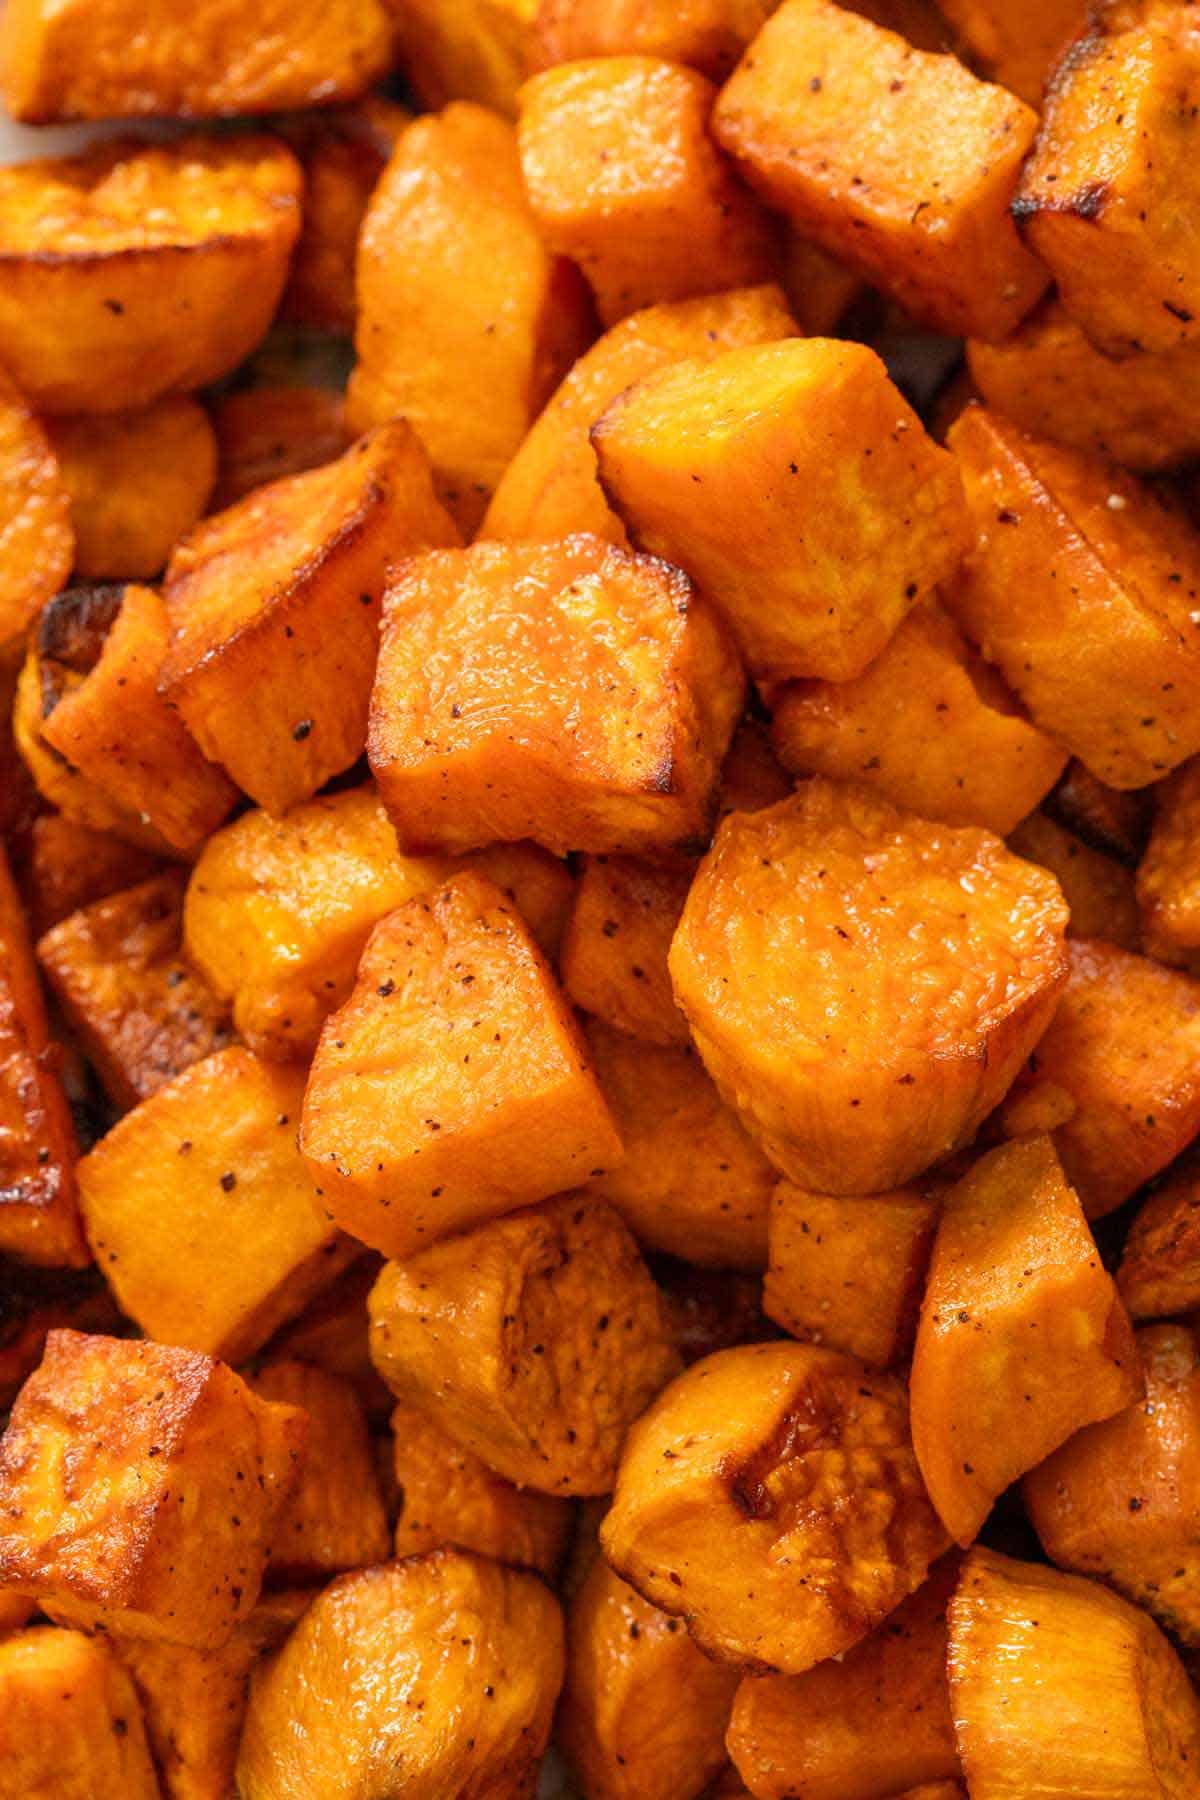 A close up view of roasted sweet potatoes.